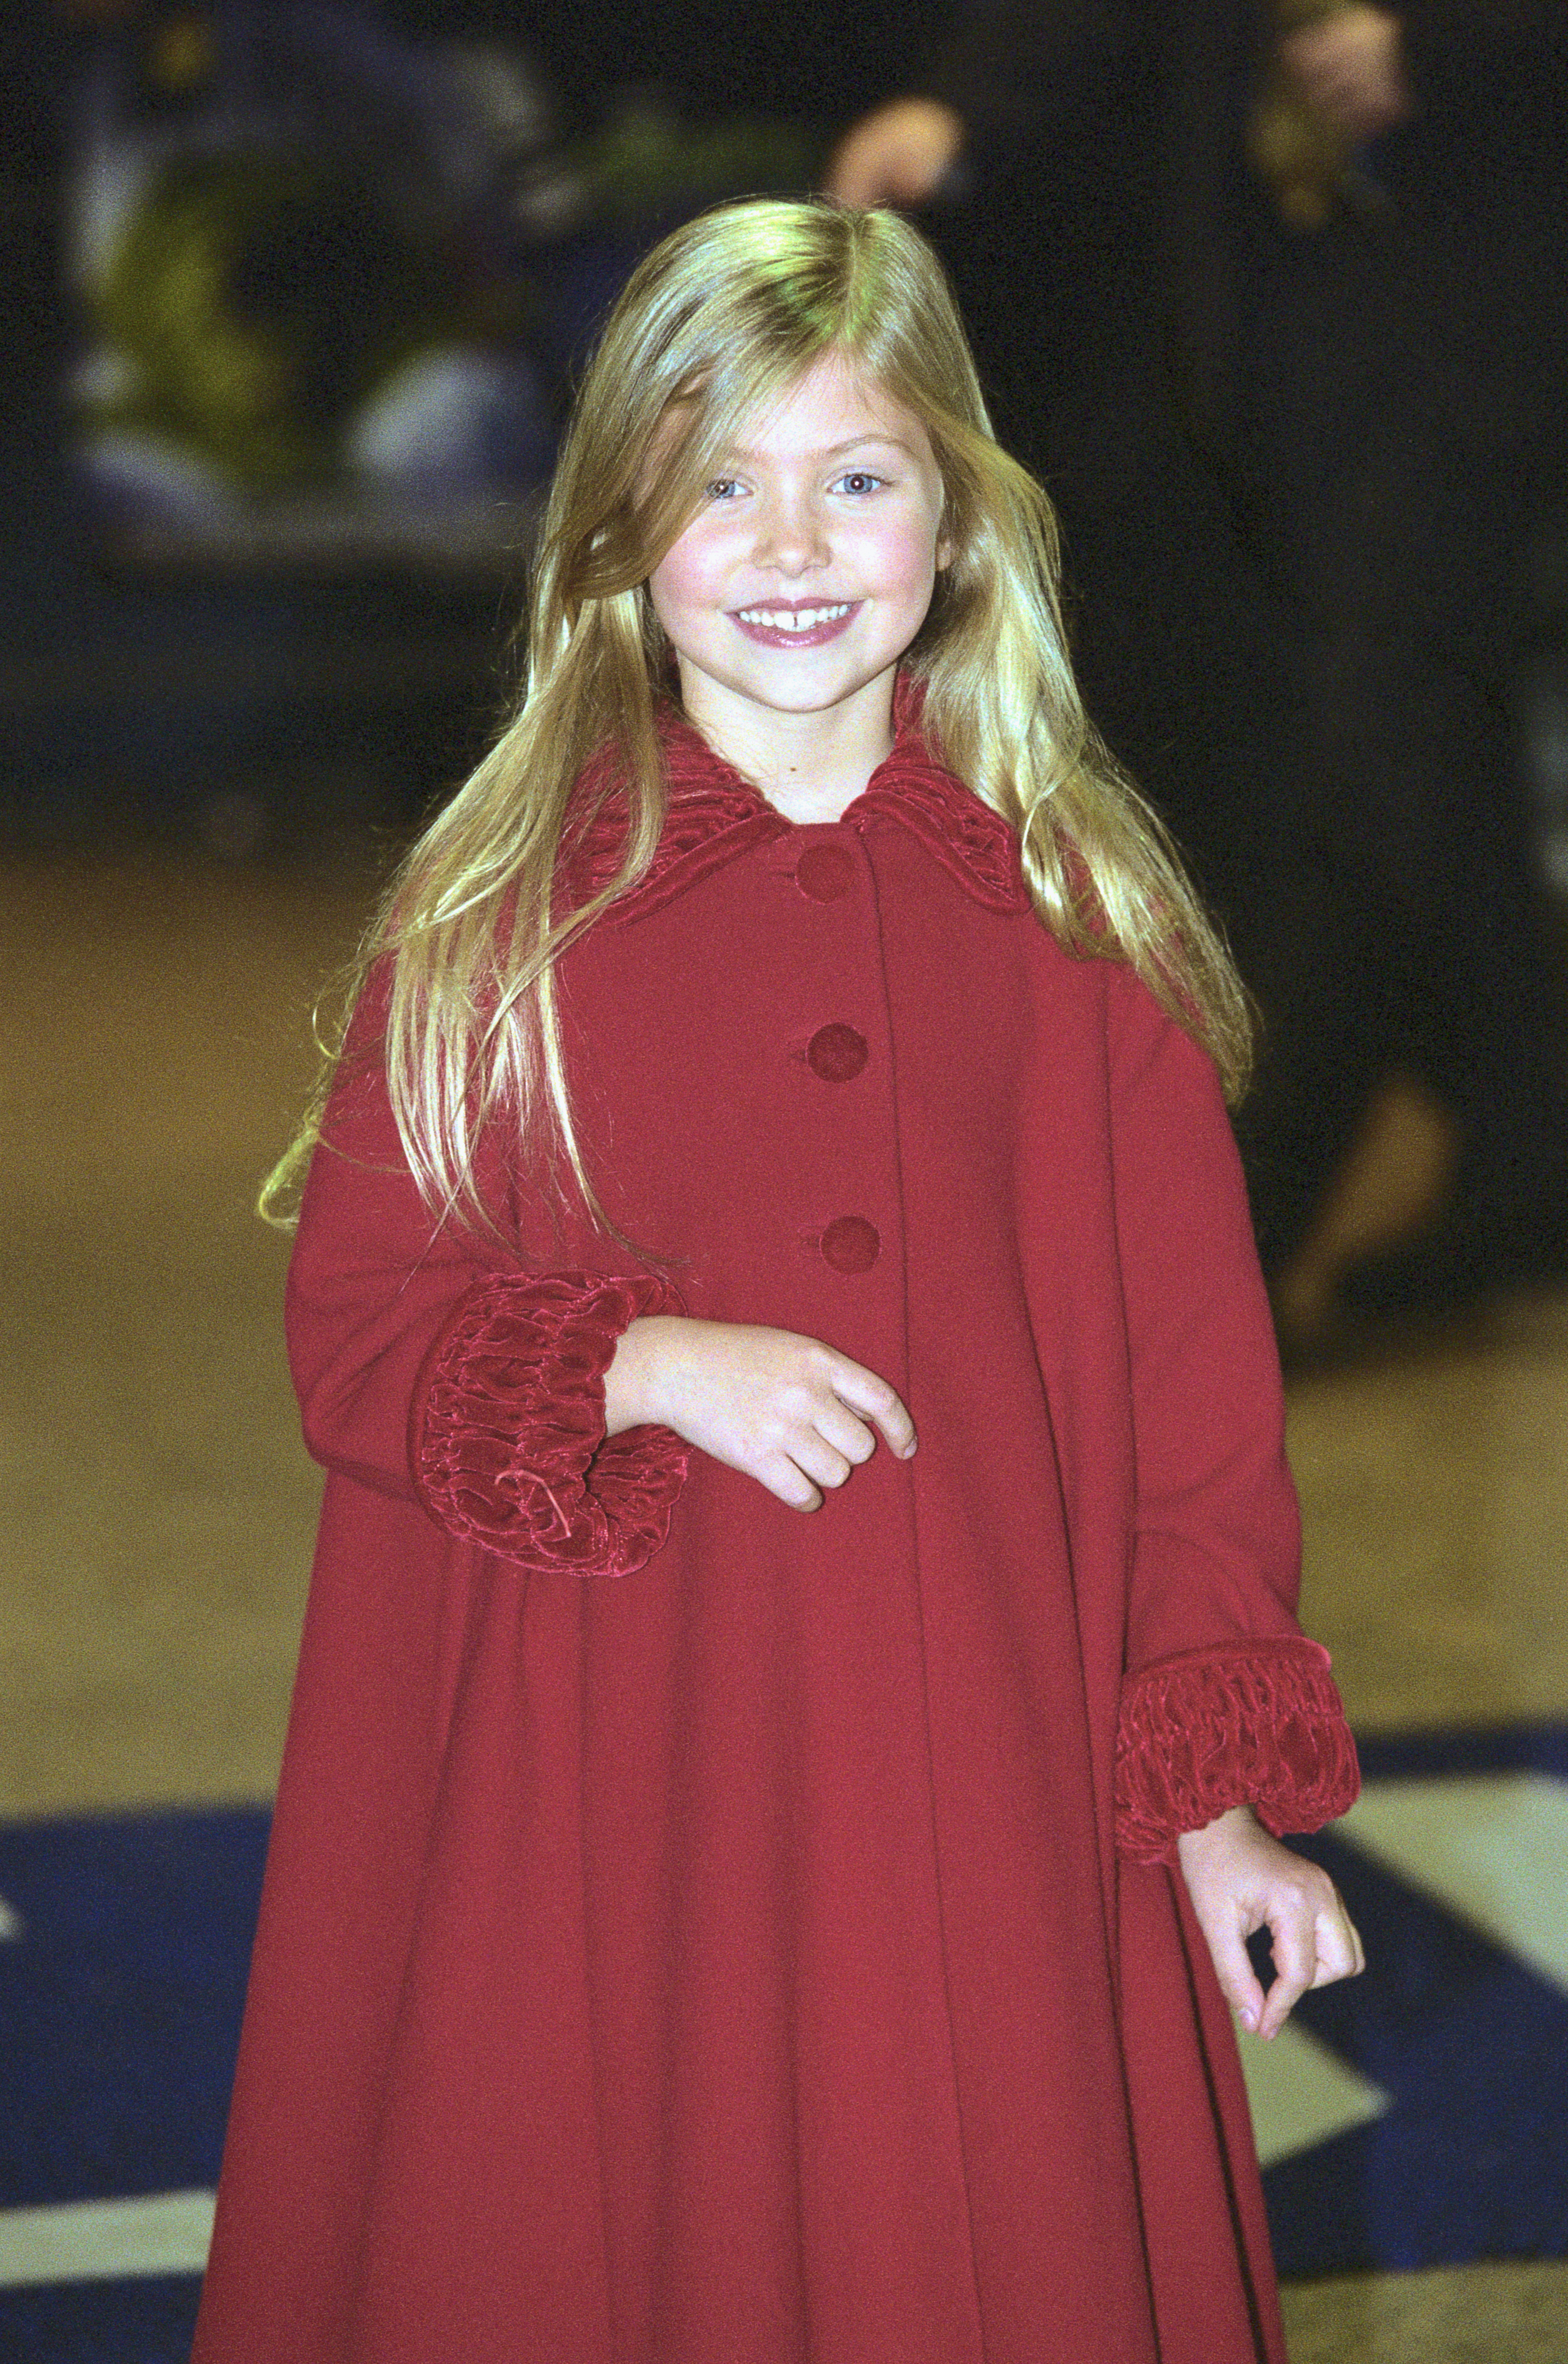 Taylor Momsen at the premiere of "How The Grinch Stole Christmas," 2000 | Source: Getty Images